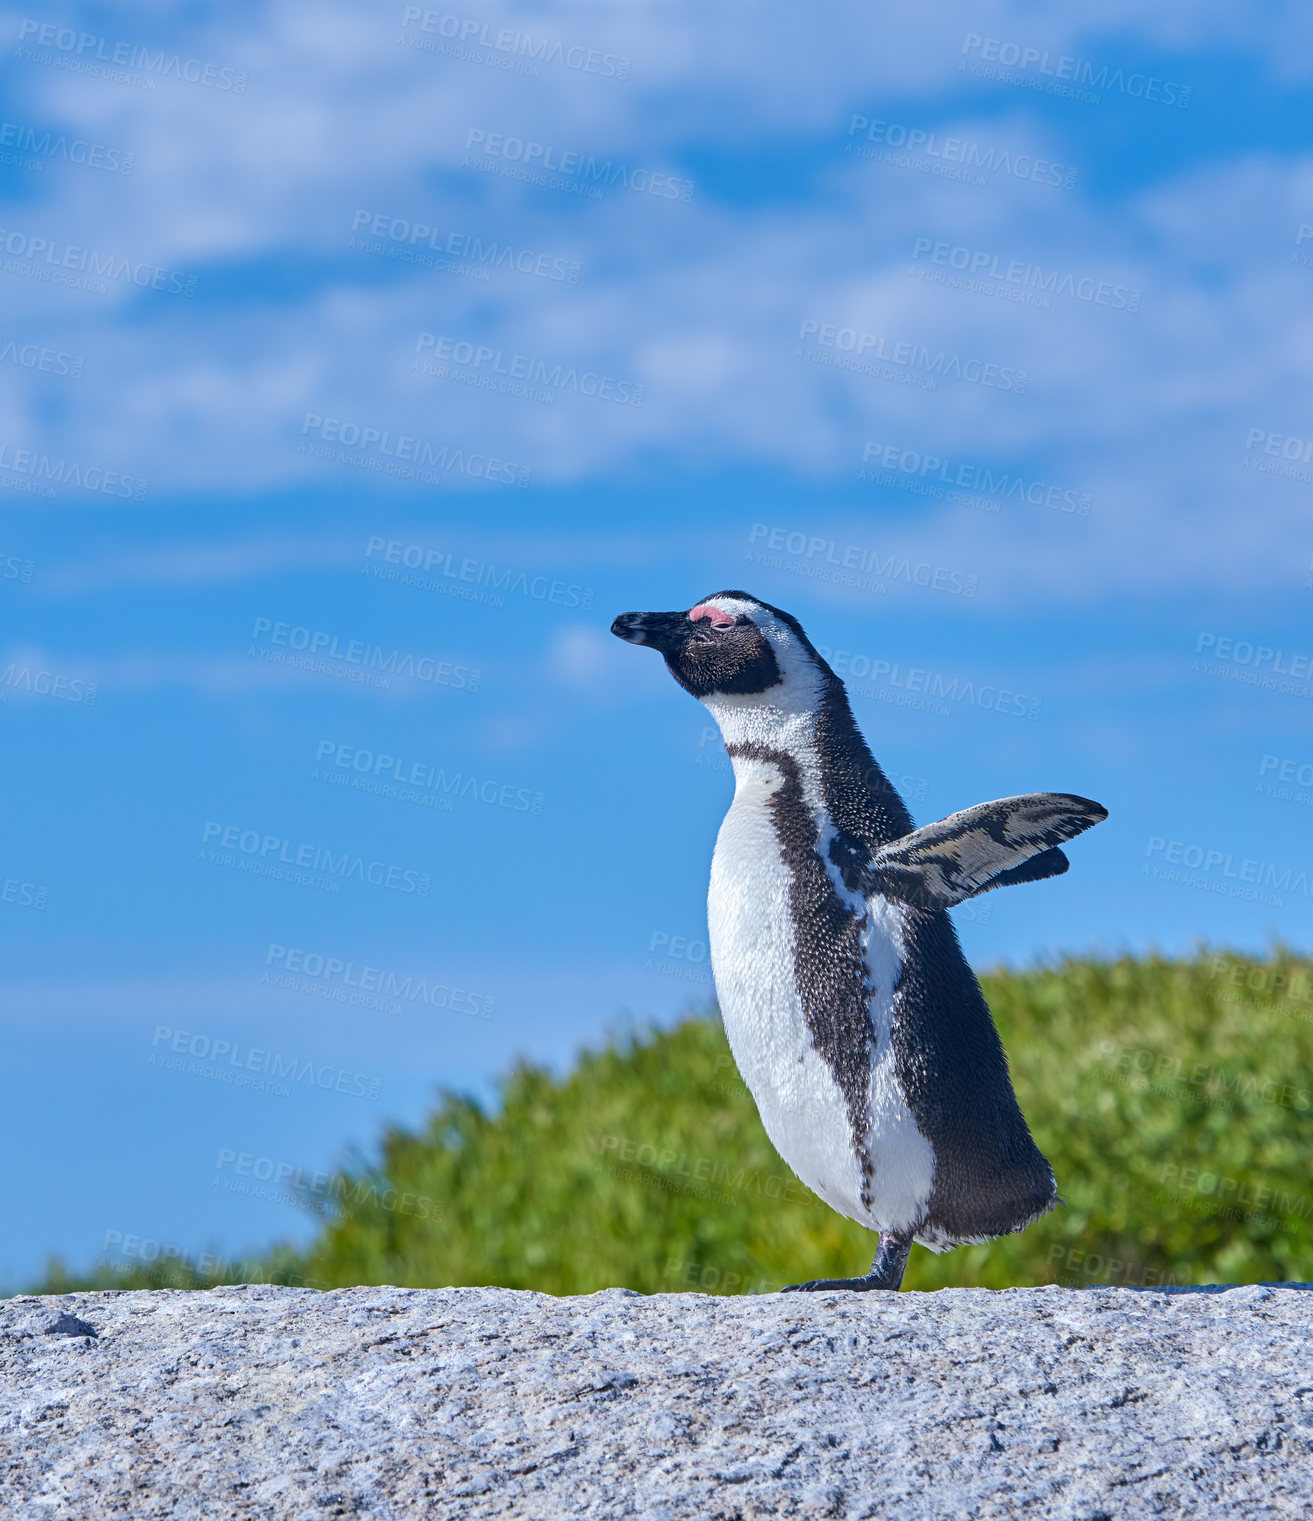 Buy stock photo A sunbathing penguin standing on a rock on a summer day with a blue sky background and copy space. An arctic animal or bird walking on a stone outdoors in nature with copyspace